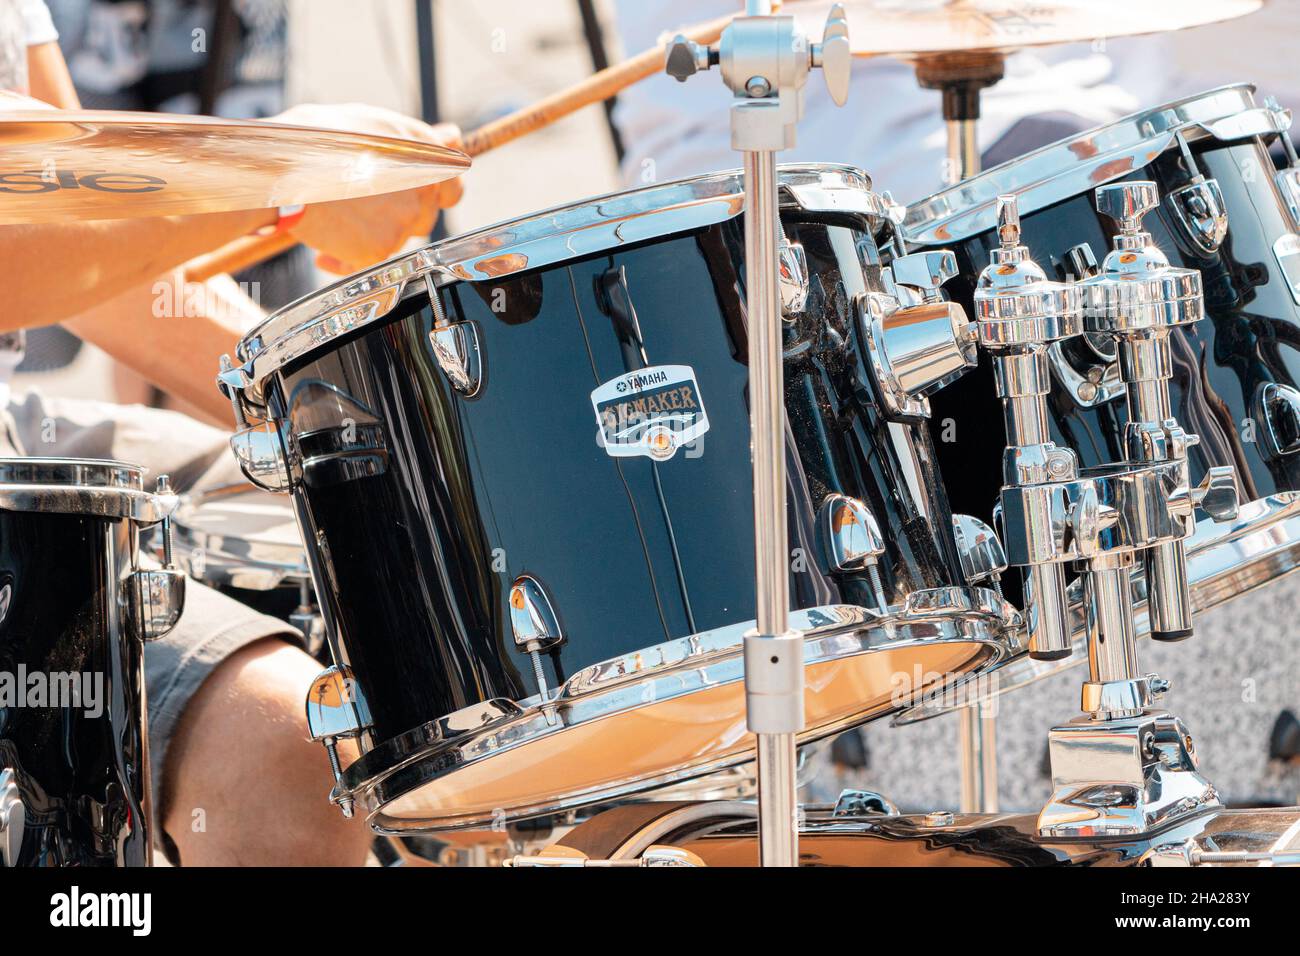 21 August 2021, Ufa, Russia: musician plays the Yamaha Gigmaker drums in  close-up on the street. Concert and rock festival concept Stock Photo -  Alamy